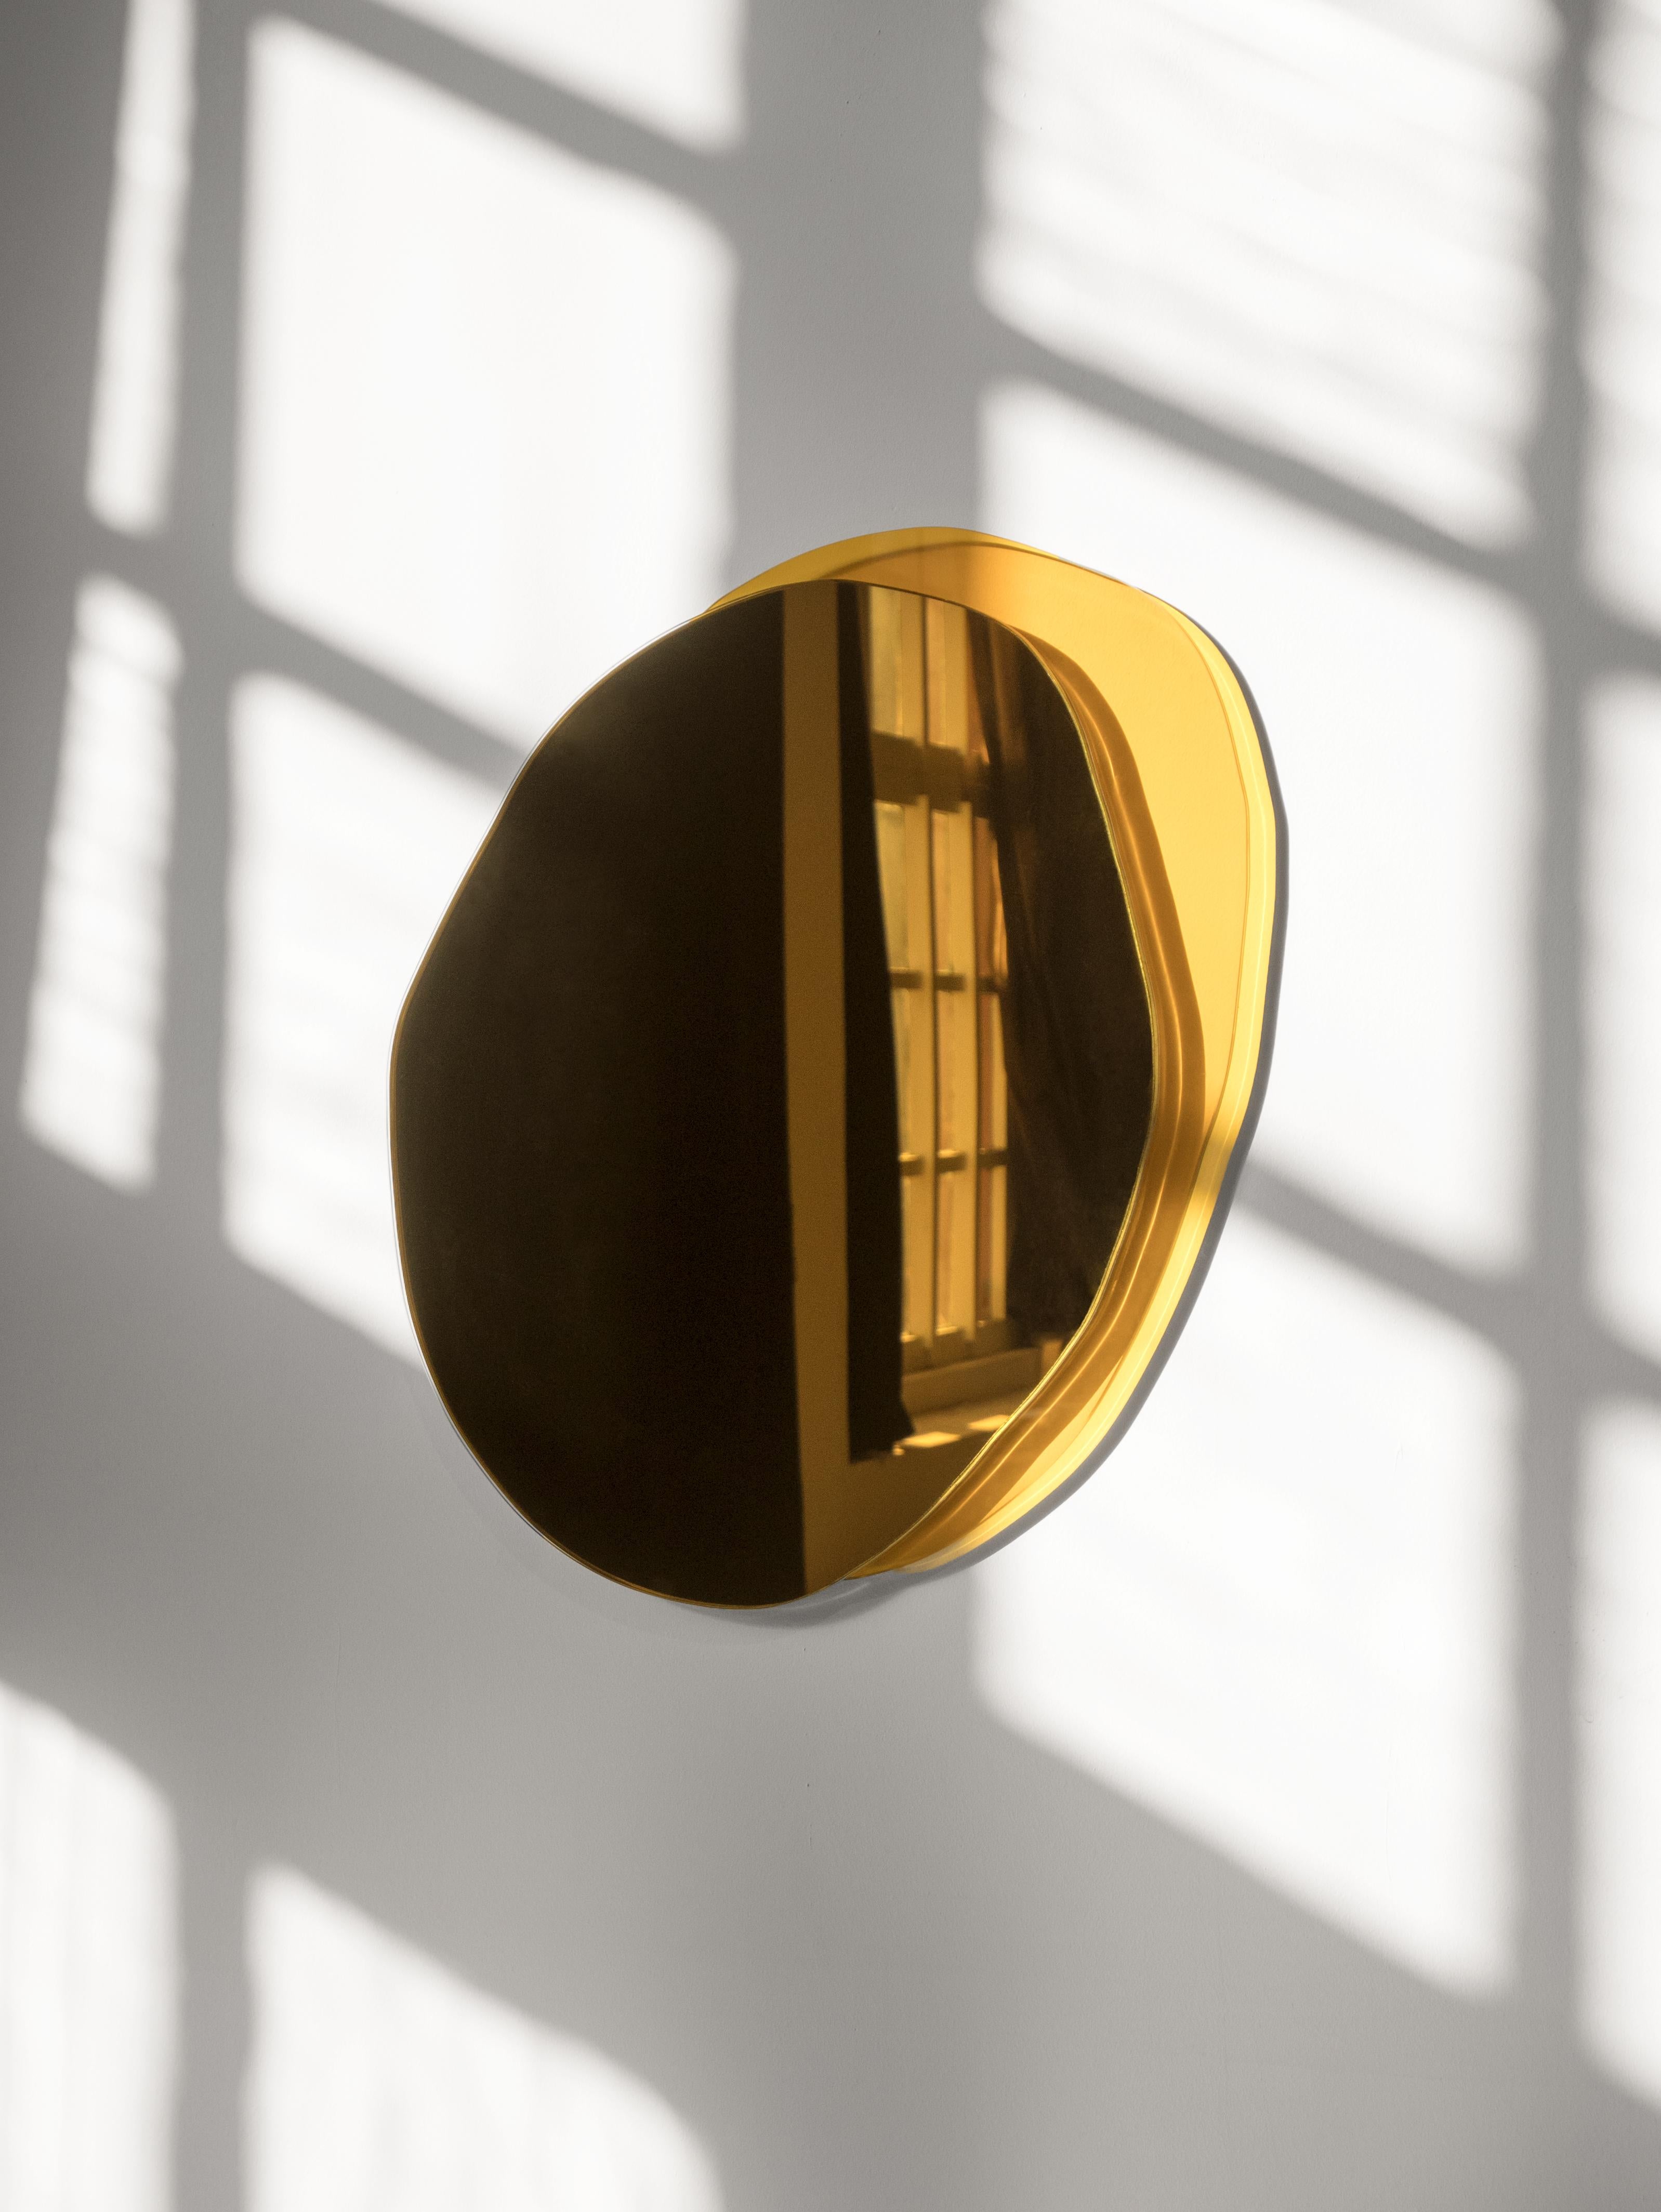 Hand-Sculpted Small Ombrée Mirror, Laurene Guarneri
Limited edition
Handmade
Gold mirror and yellow glass
Sizes : 100 x 80 x 2,5 cm
(Could be made to order in other dimensions)
Hang hook supplied

Laurène Guarneri is a designer based in